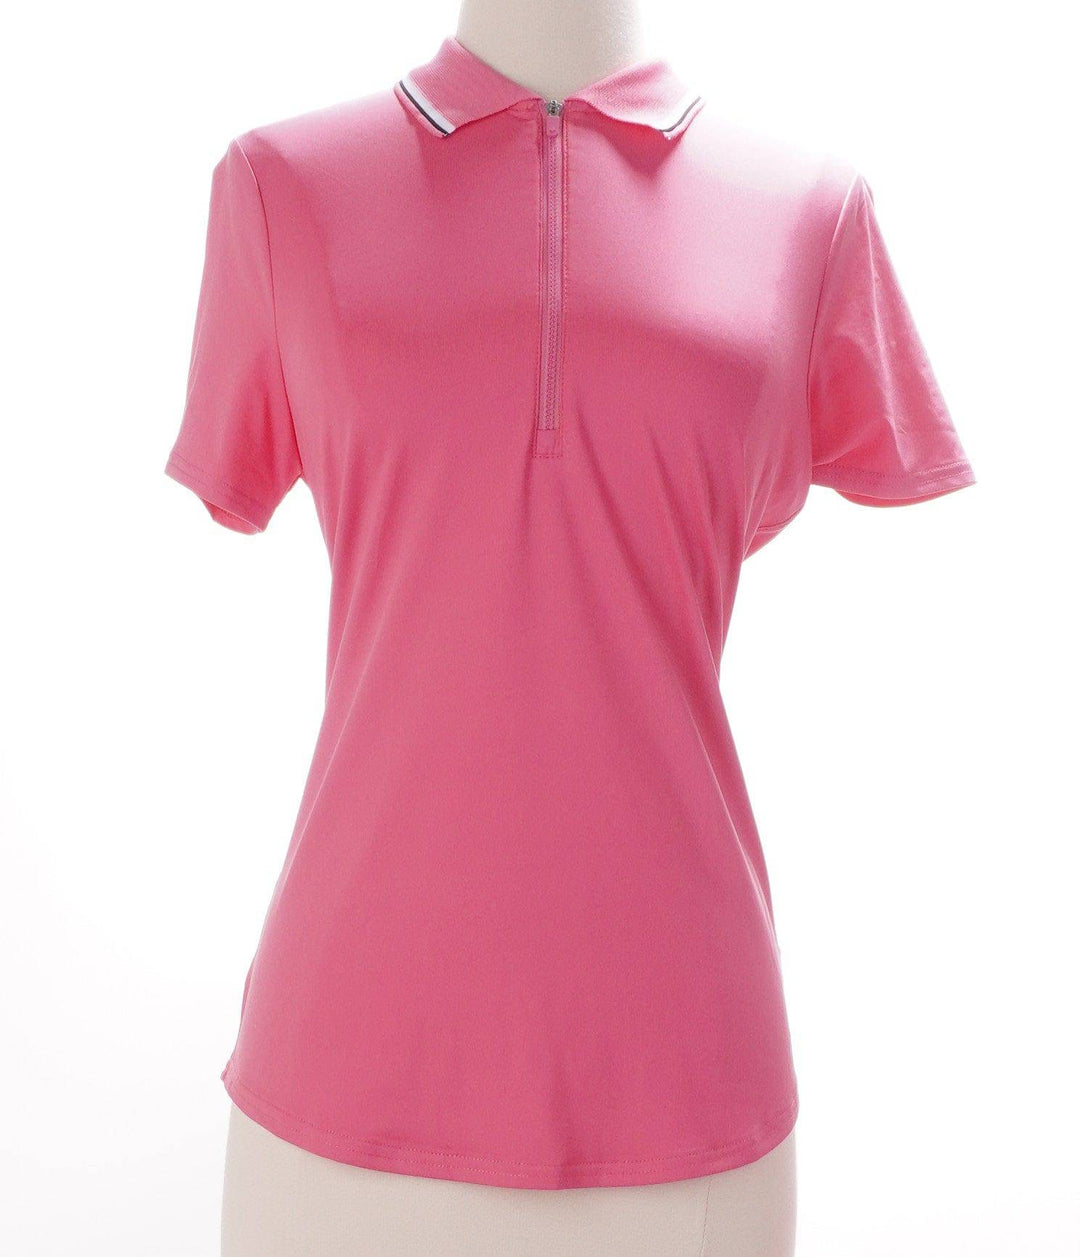 Skorzie Small / Pink Jofit Short Sleeve Top Exclusive Product - Pink Polo - Size Small Apparel & Accessories